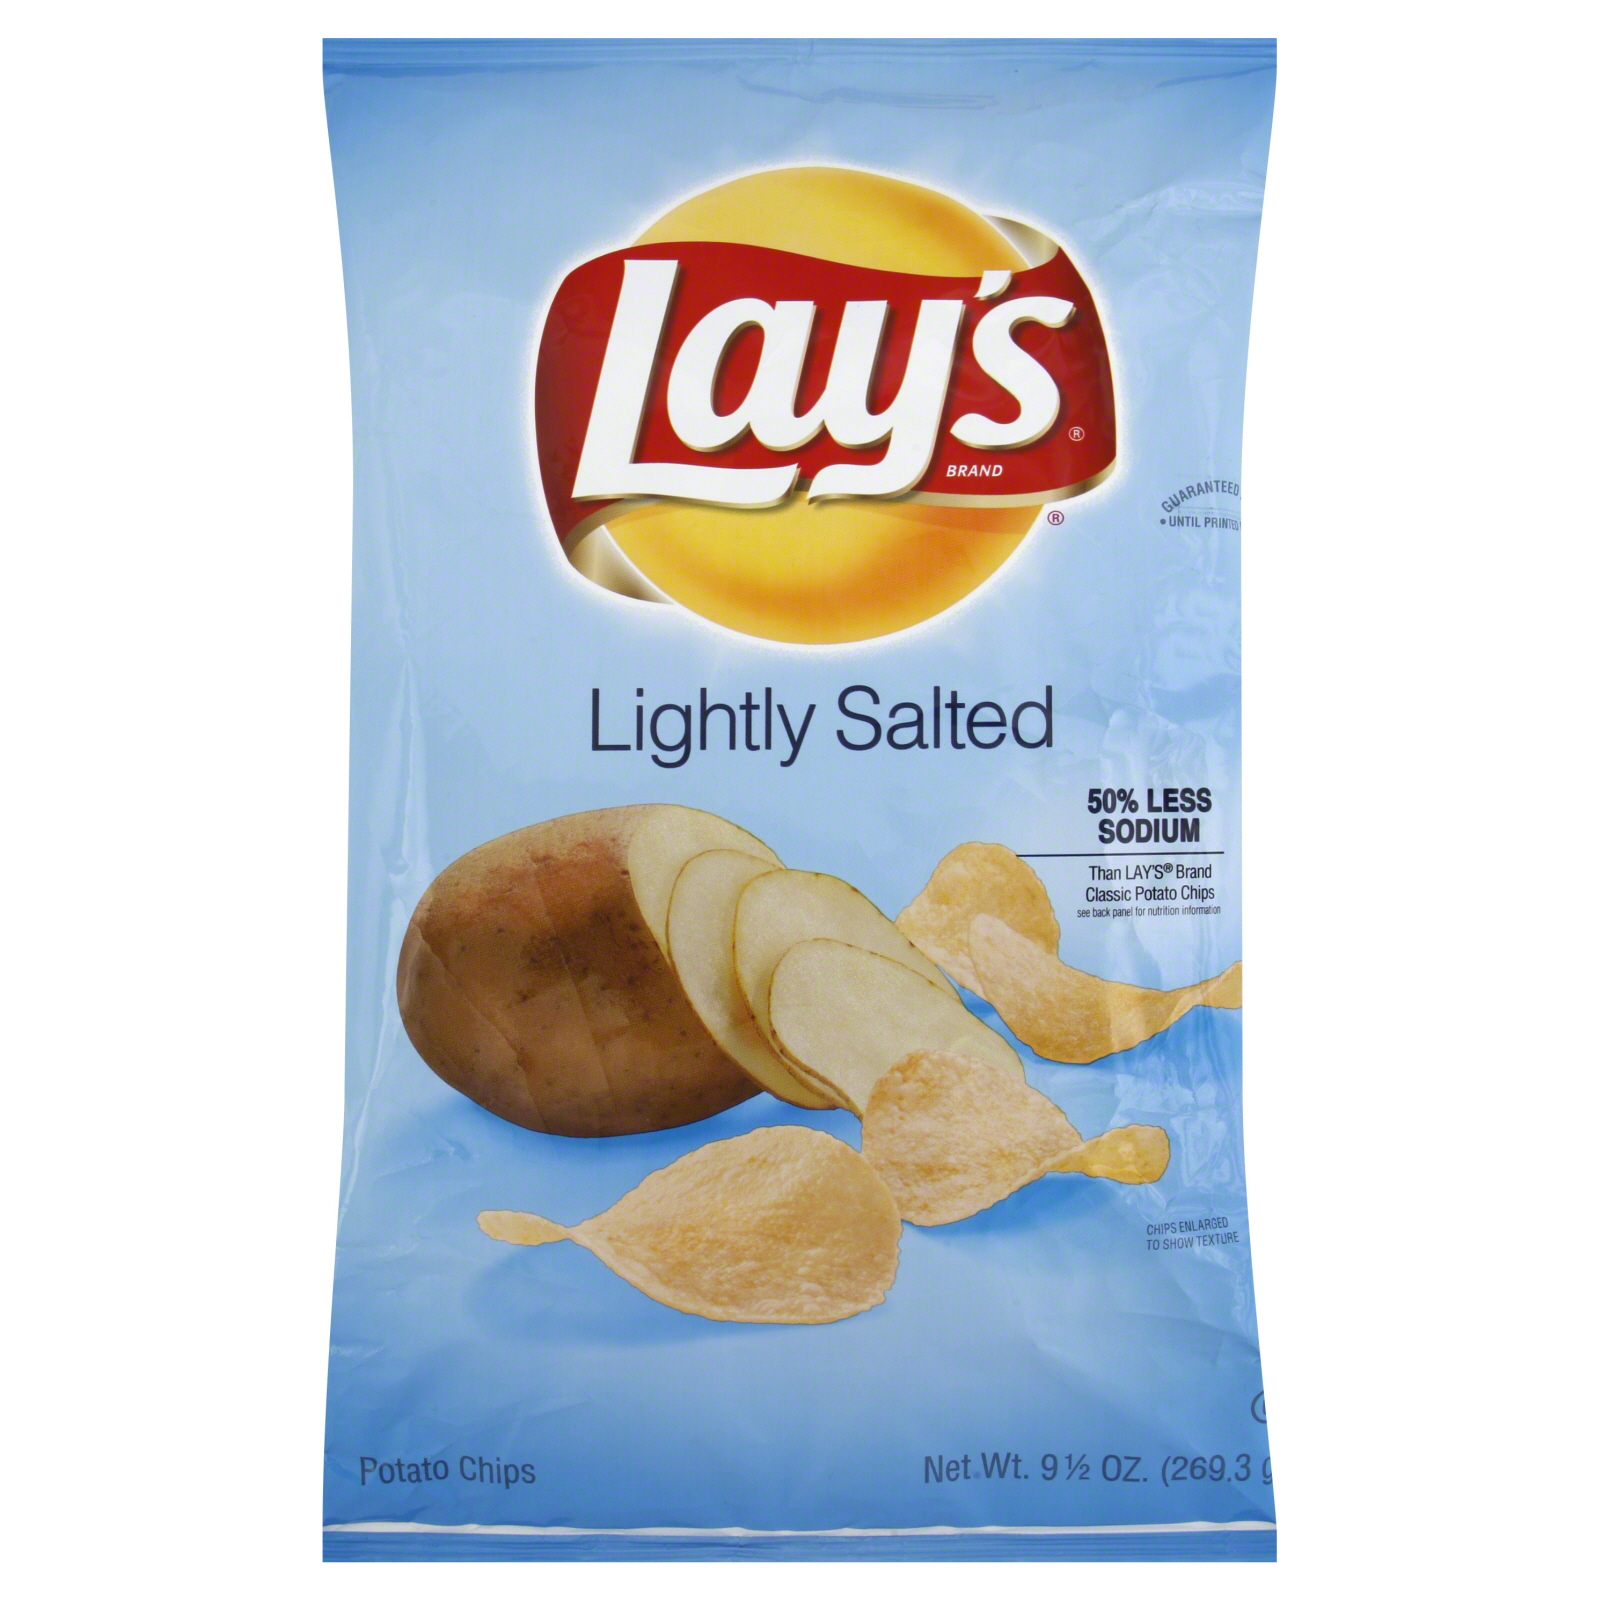 Lay's Lightly Salted, Potato Chips, 9.5 oz (269.3 g)